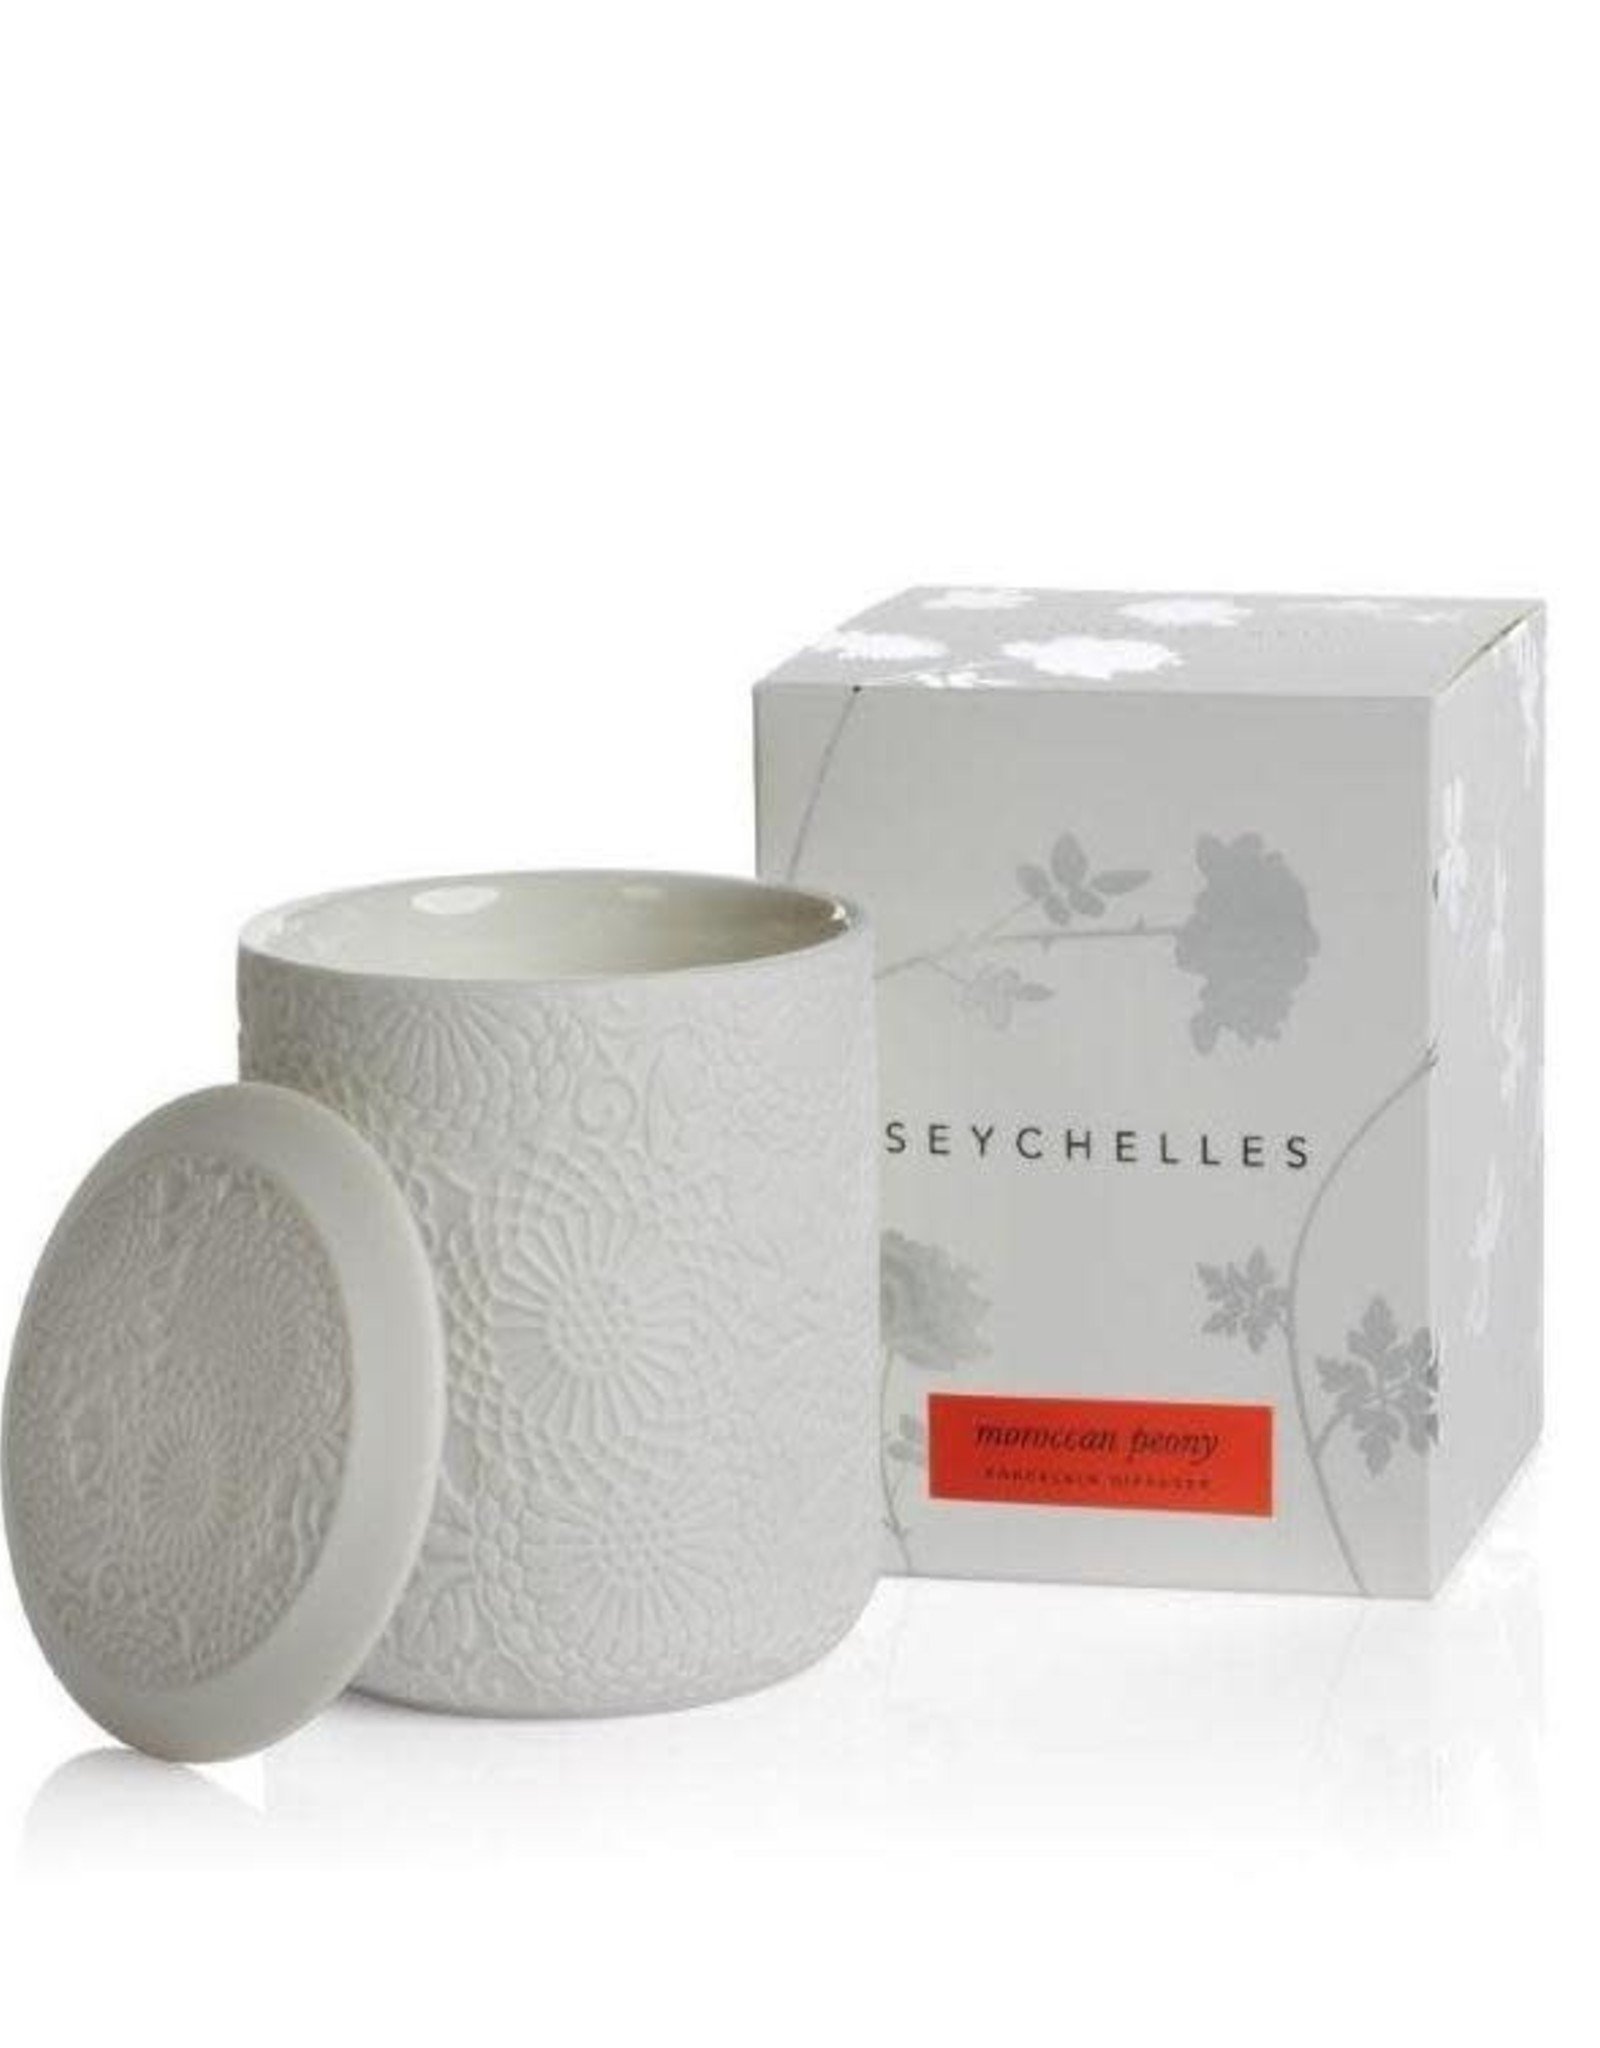 Zodax Zodax Seychelles  Candle